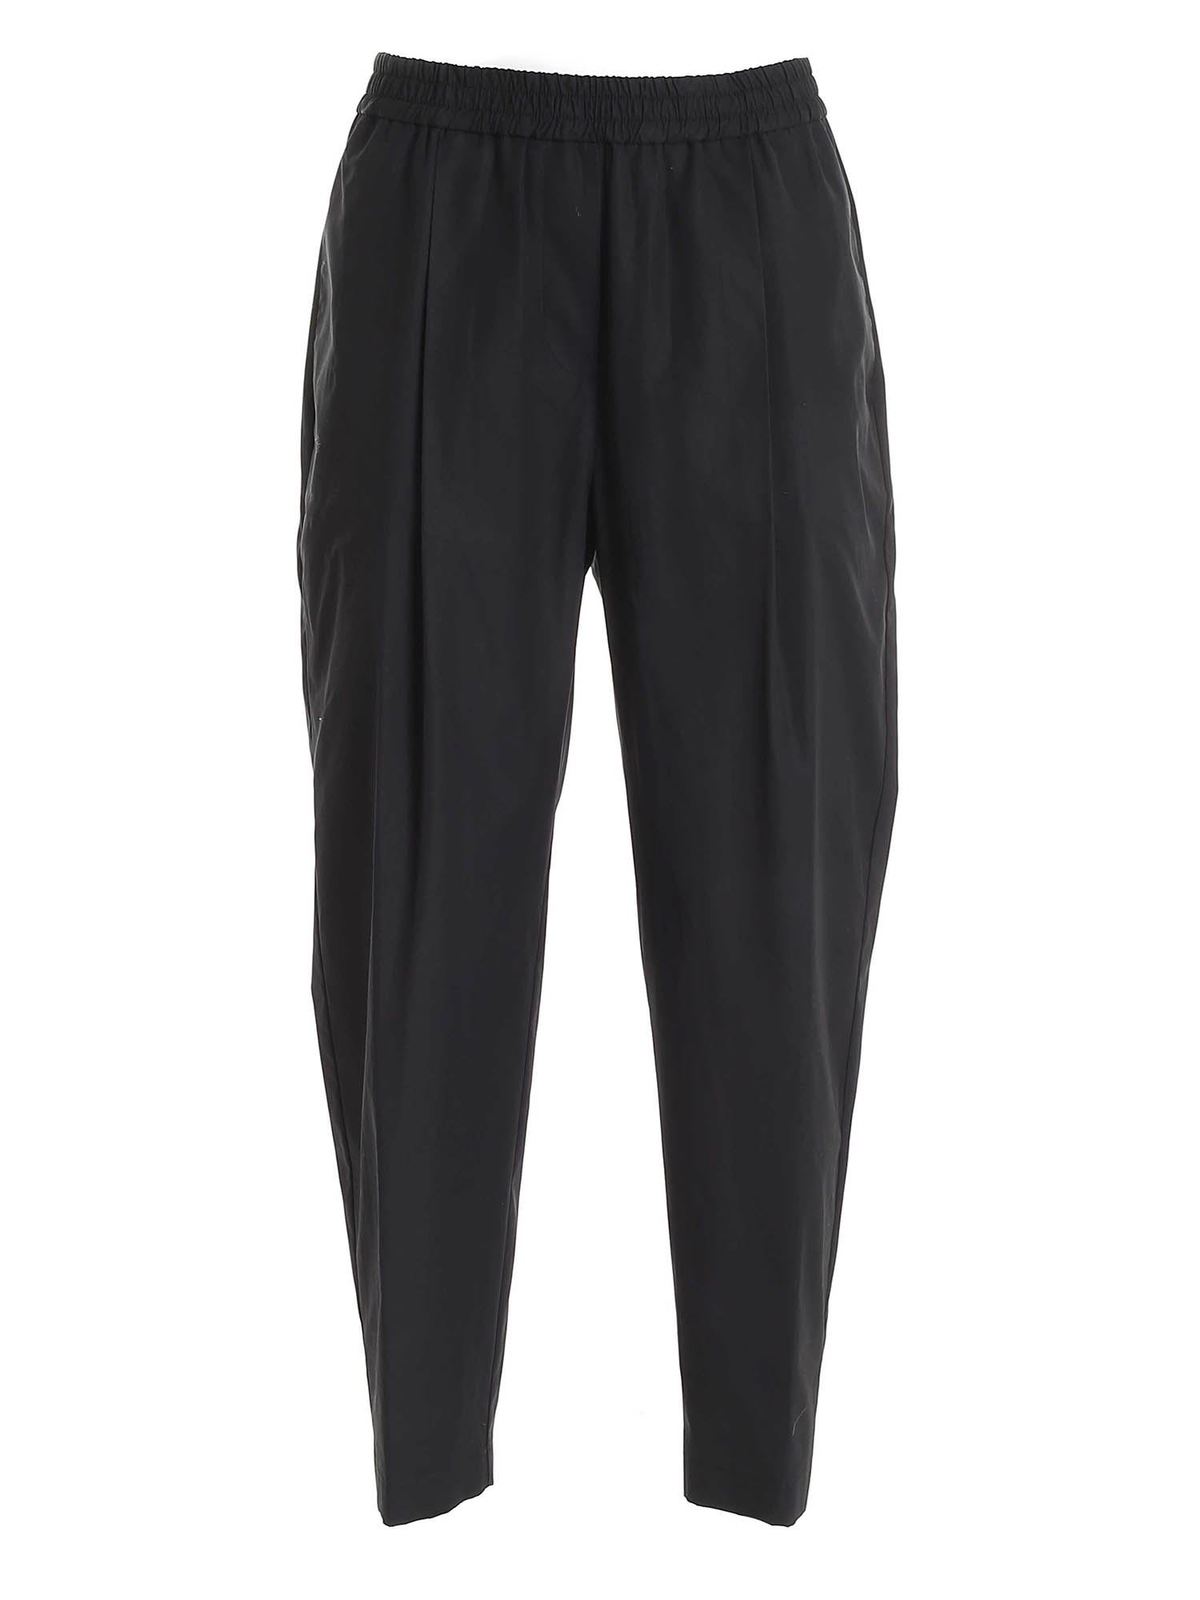 ASPESI RELAXED FIT TROUSERS IN BLACK